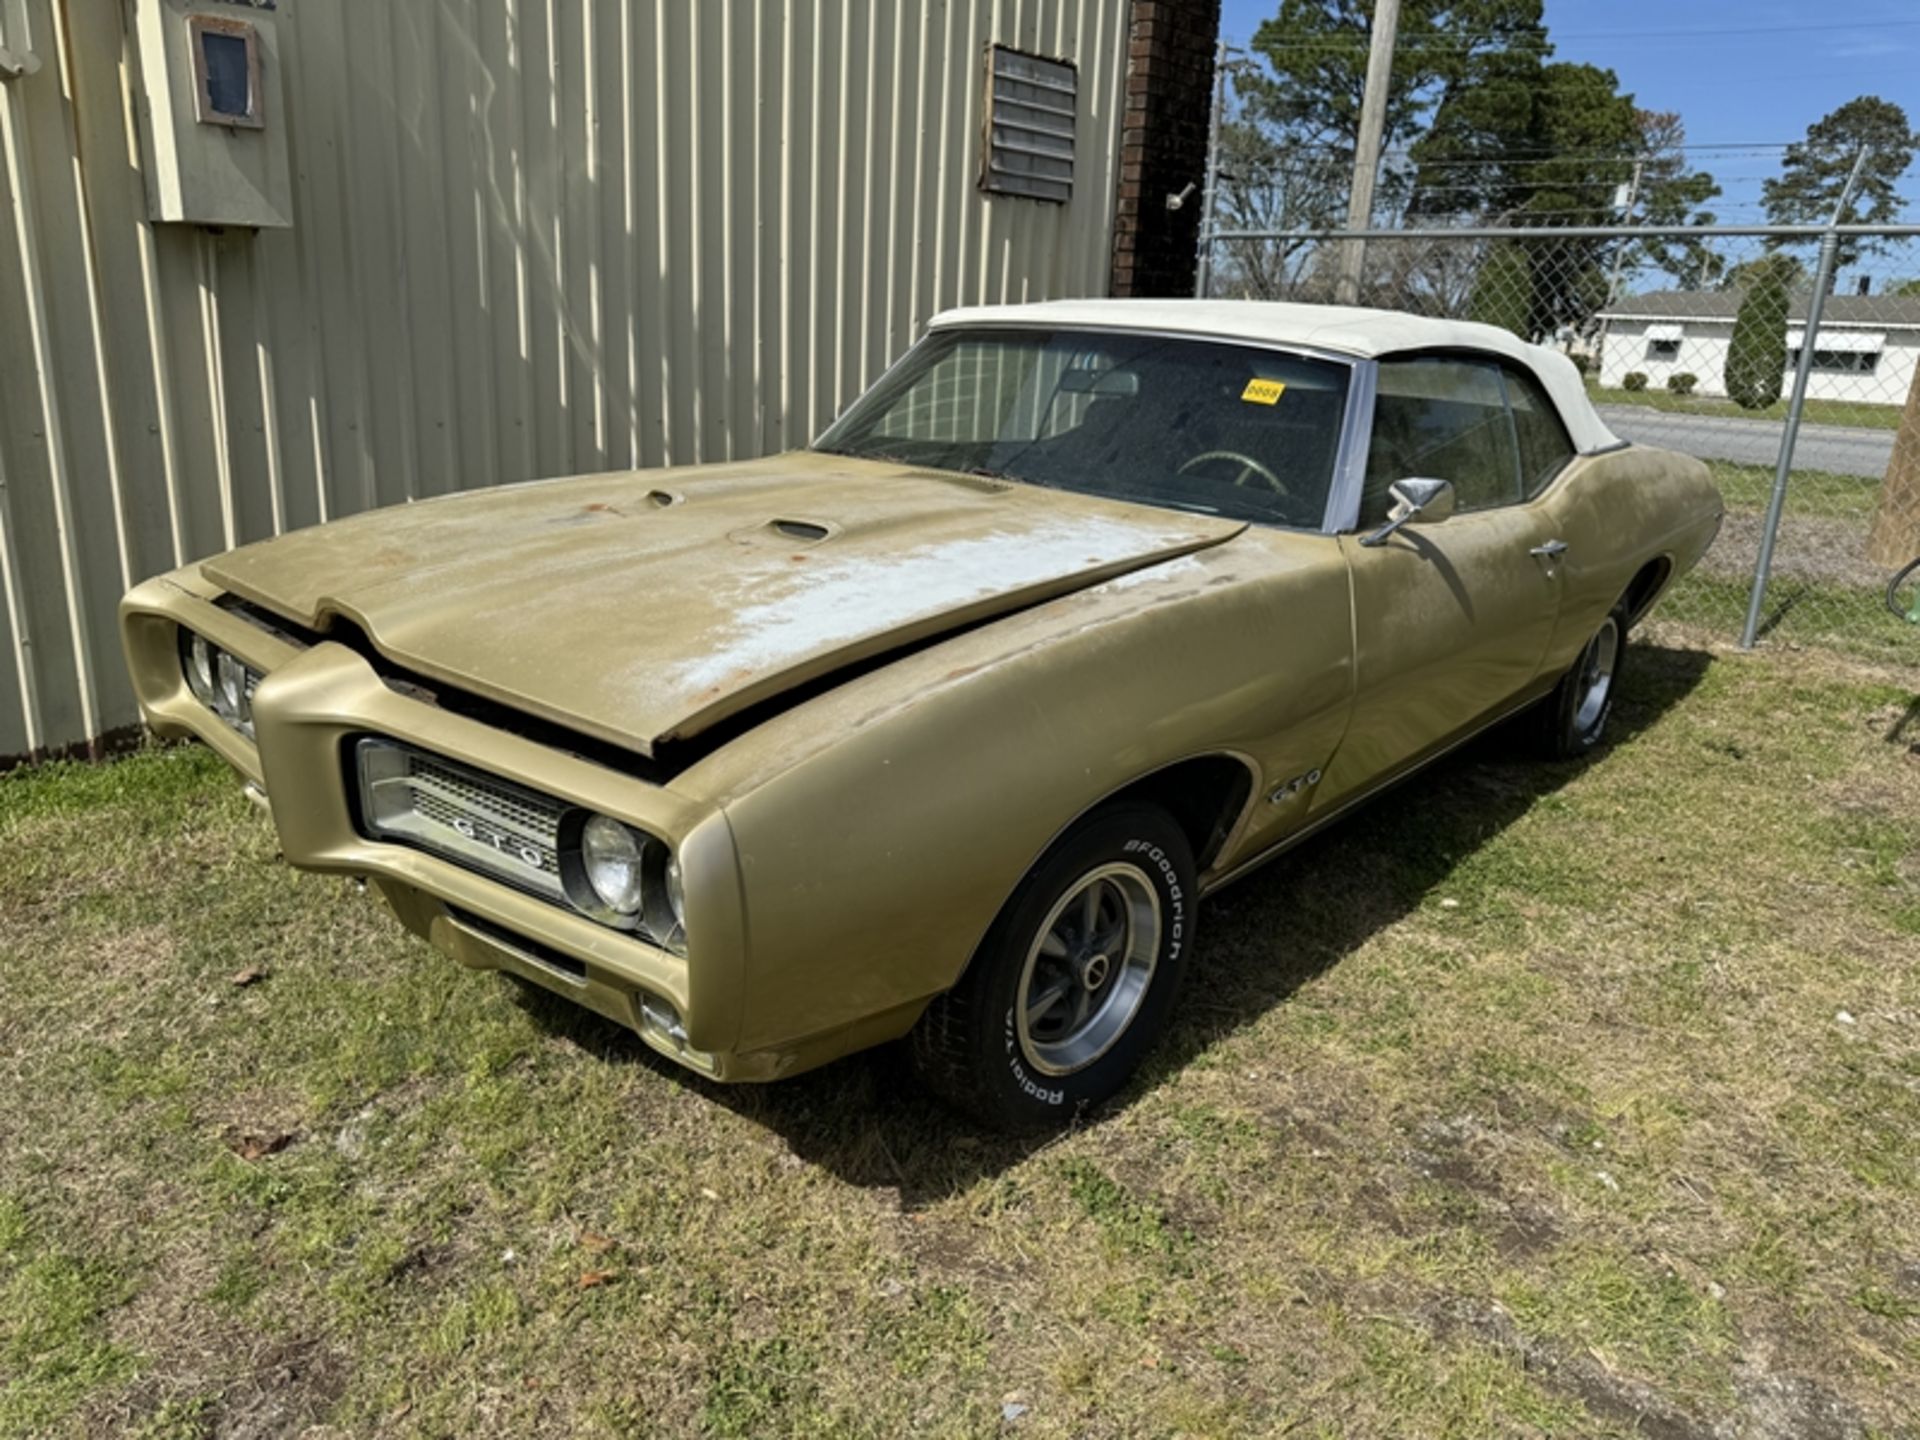 1969 PONTIAC GTO convertible - engine rebuilt and modified, but not hooked up completely - mileage